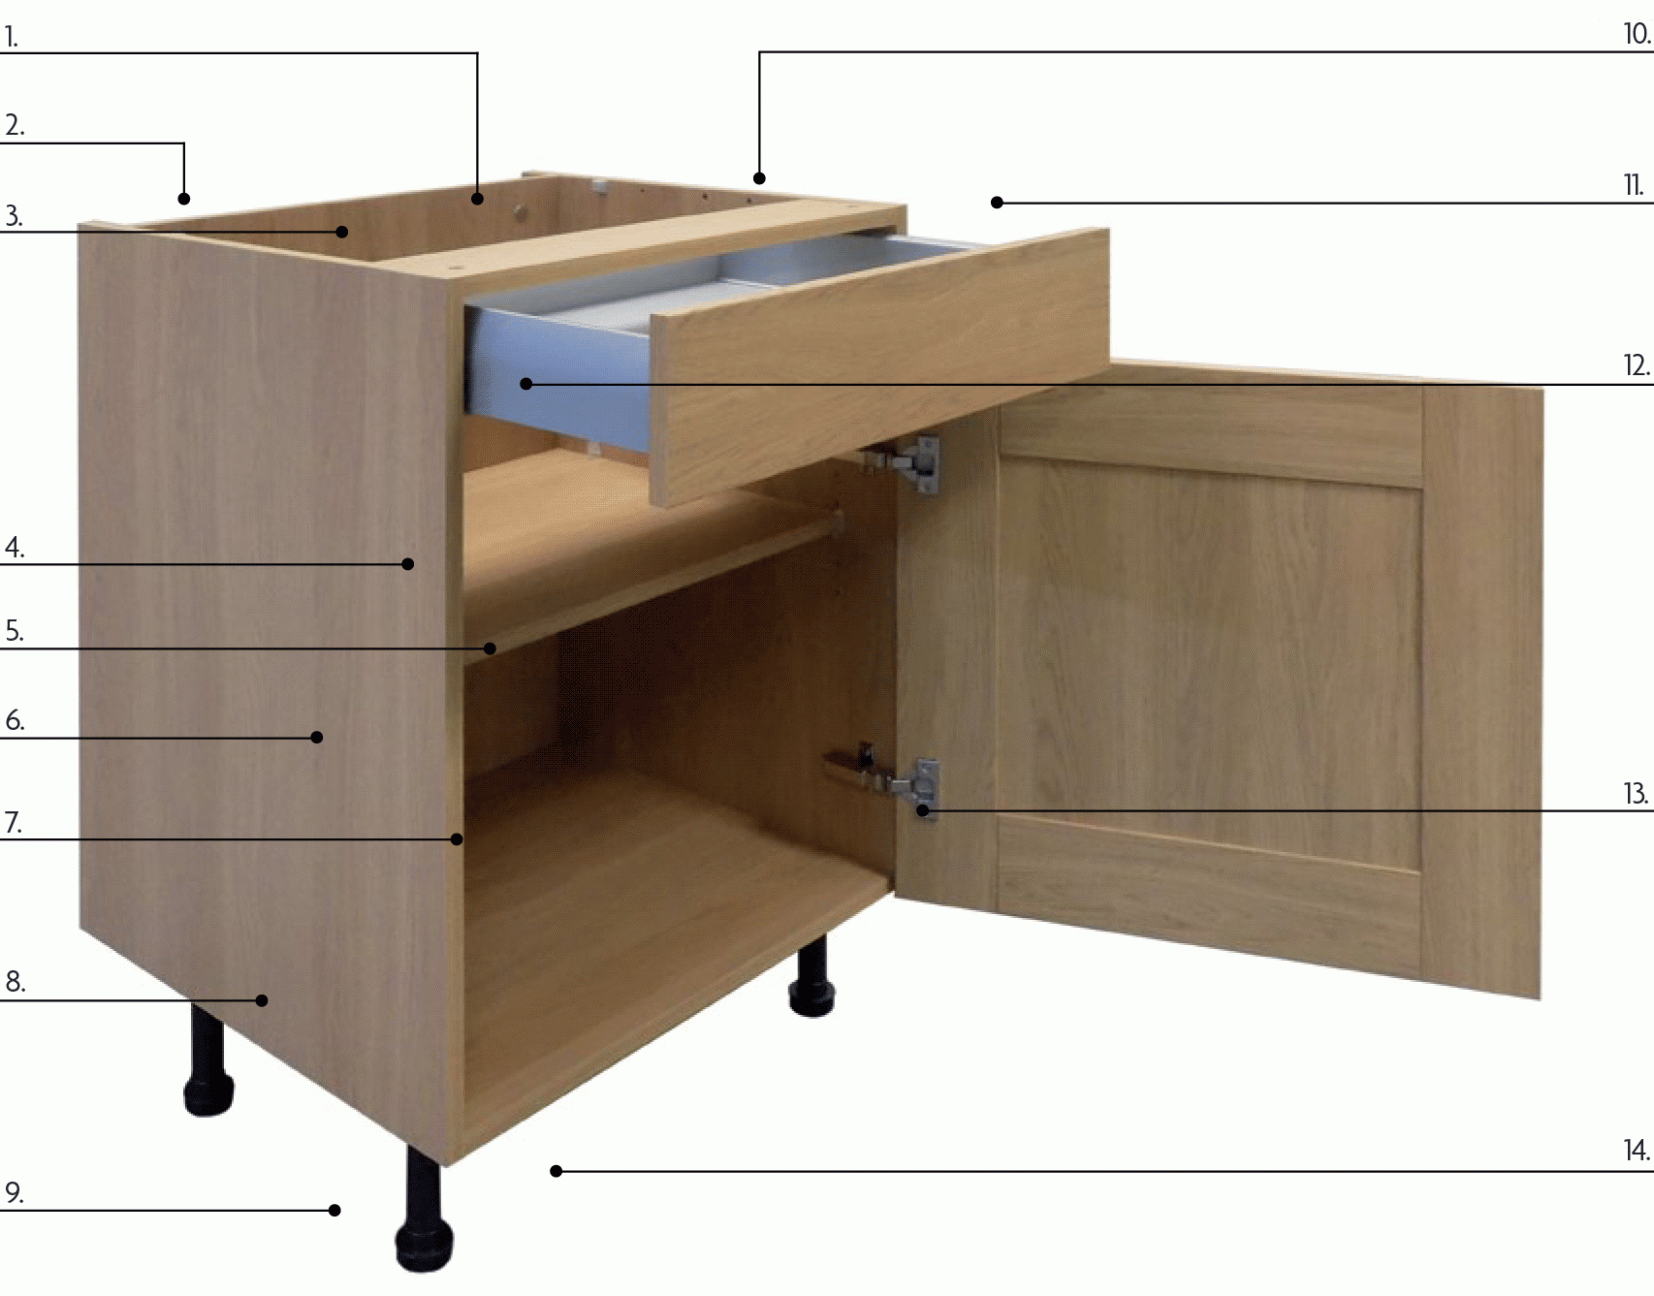 Flat Pack Kitchen Cabinets - flat pack cabinets